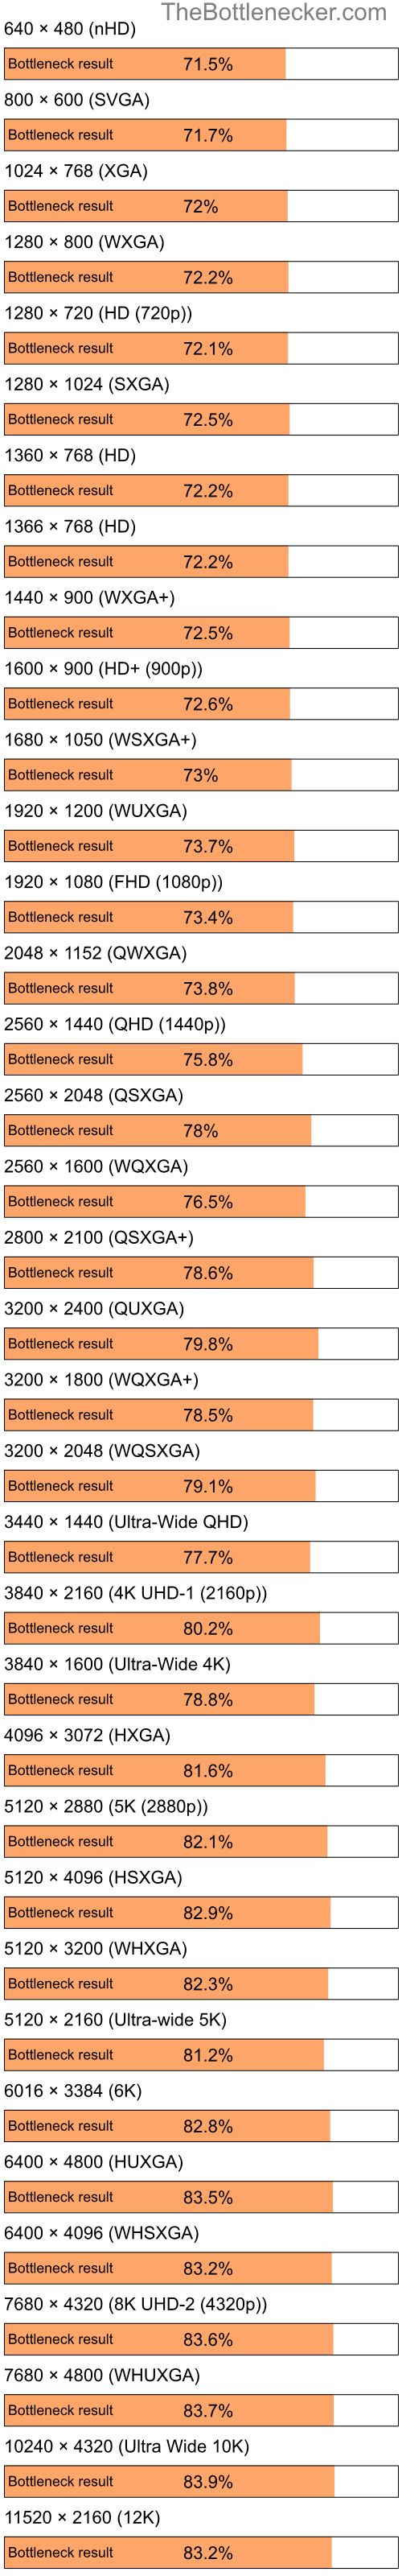 Bottleneck results by resolution for Intel Pentium 4 and NVIDIA GeForce Go 6600 in Graphic Card Intense Tasks